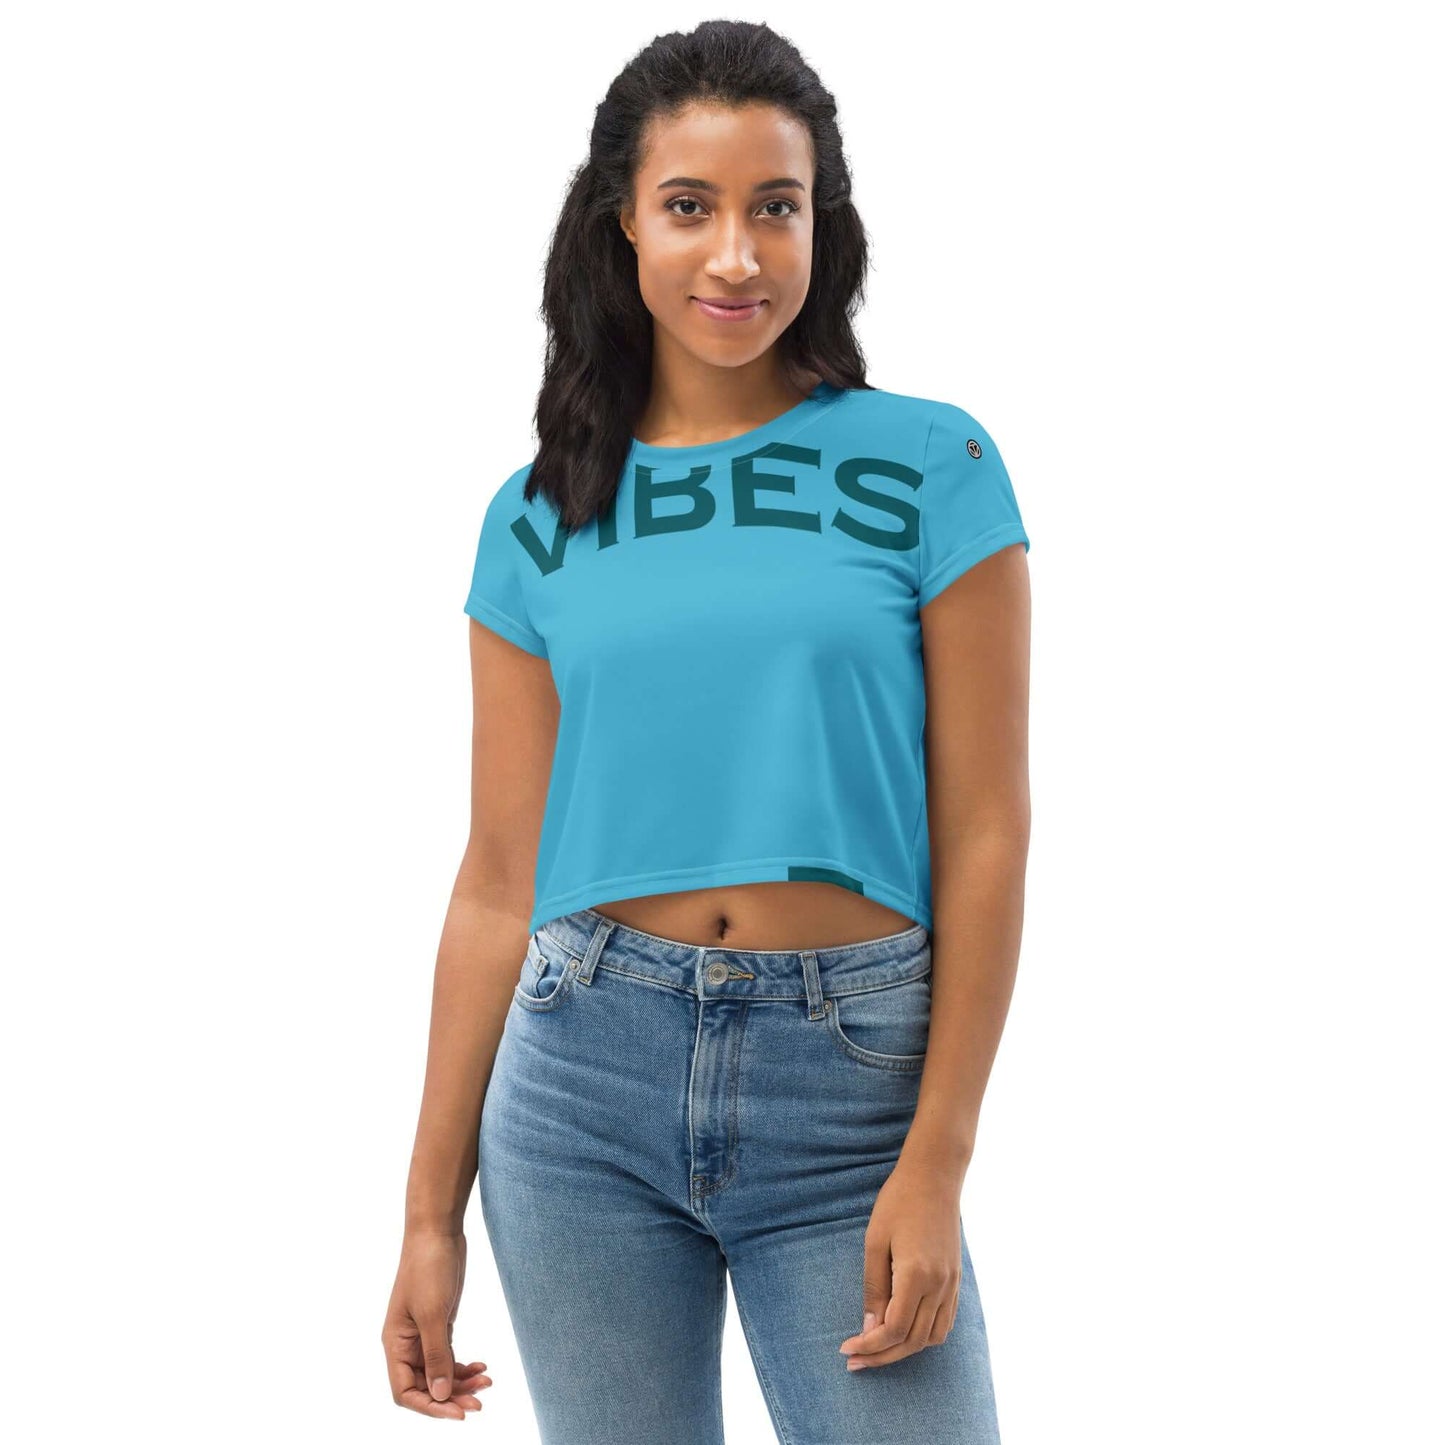 TIME OF VIBES - Crop Tee VIBES (Skyblue) - €46.50